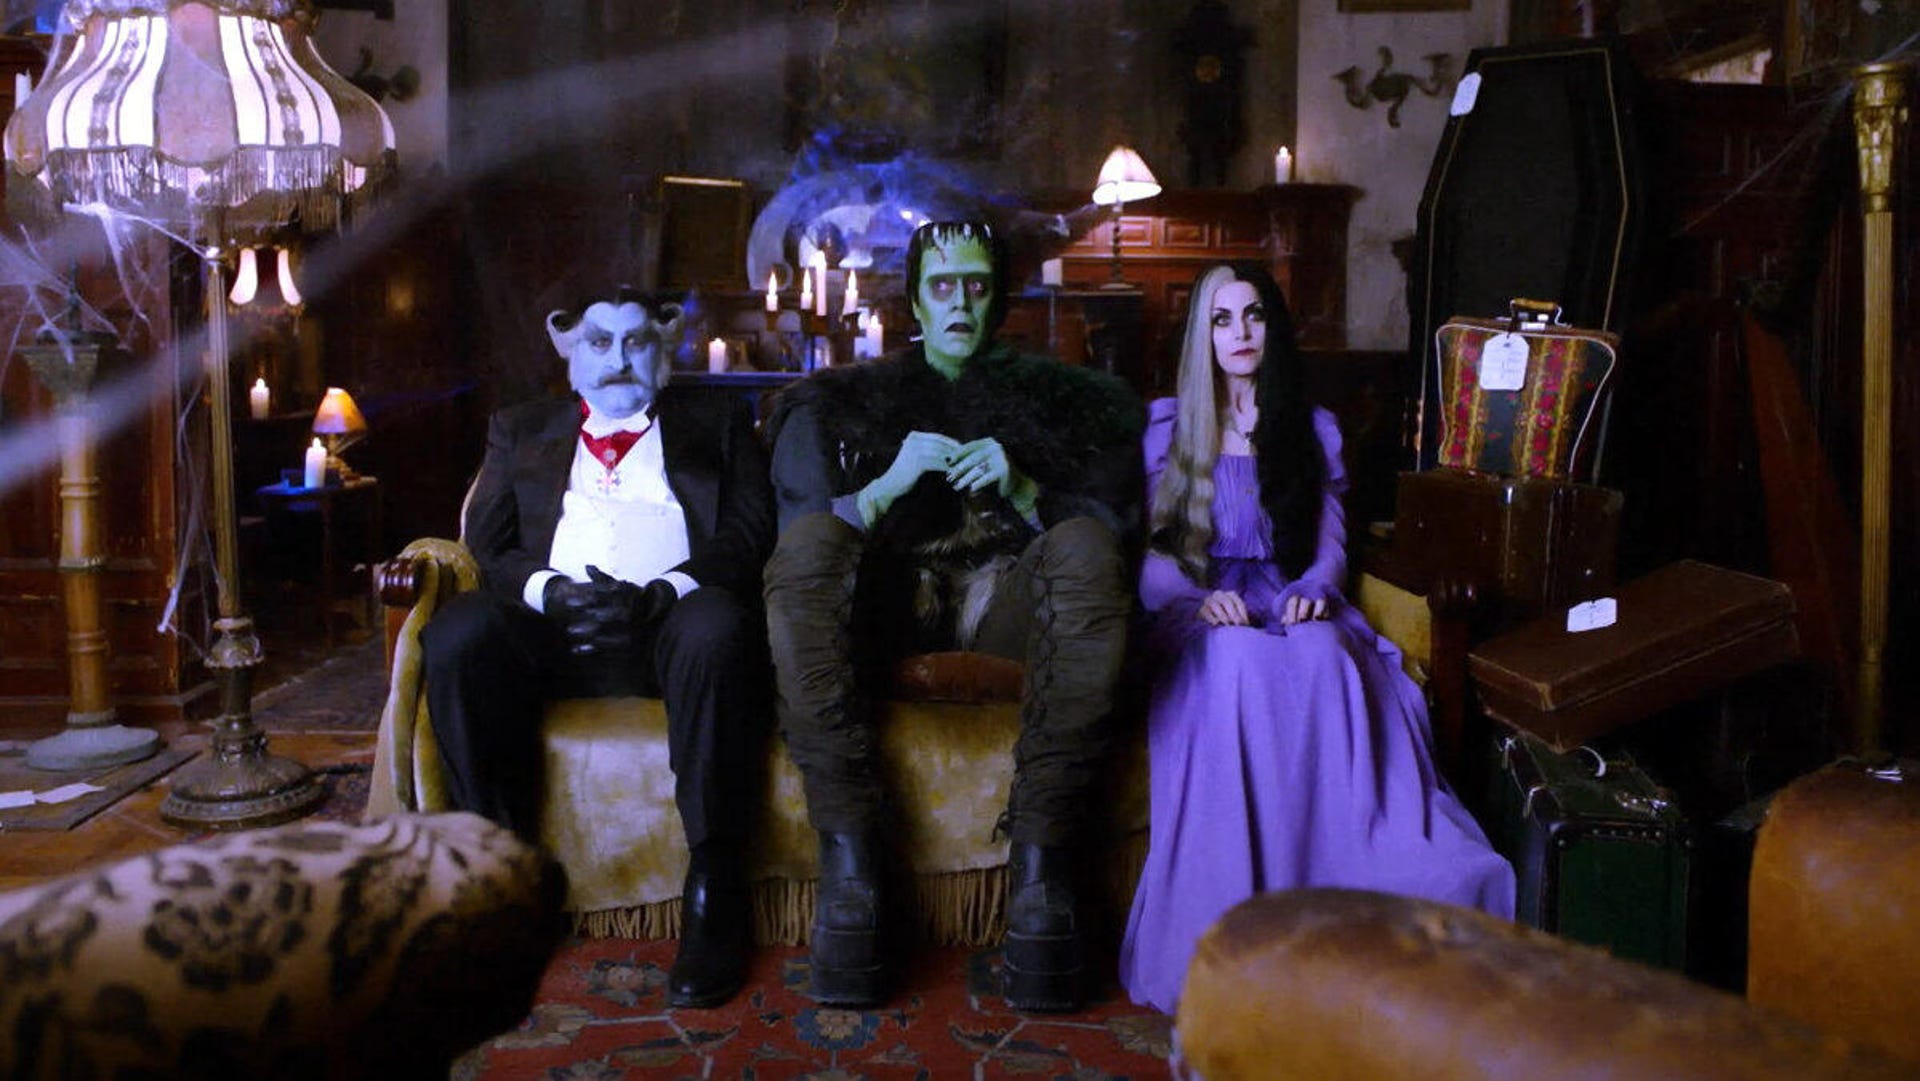 Grandpa, Herman Munster and Lily Munster sit on a couch together in color in a teaser screenshot from Rob Zombie's The Munsters.